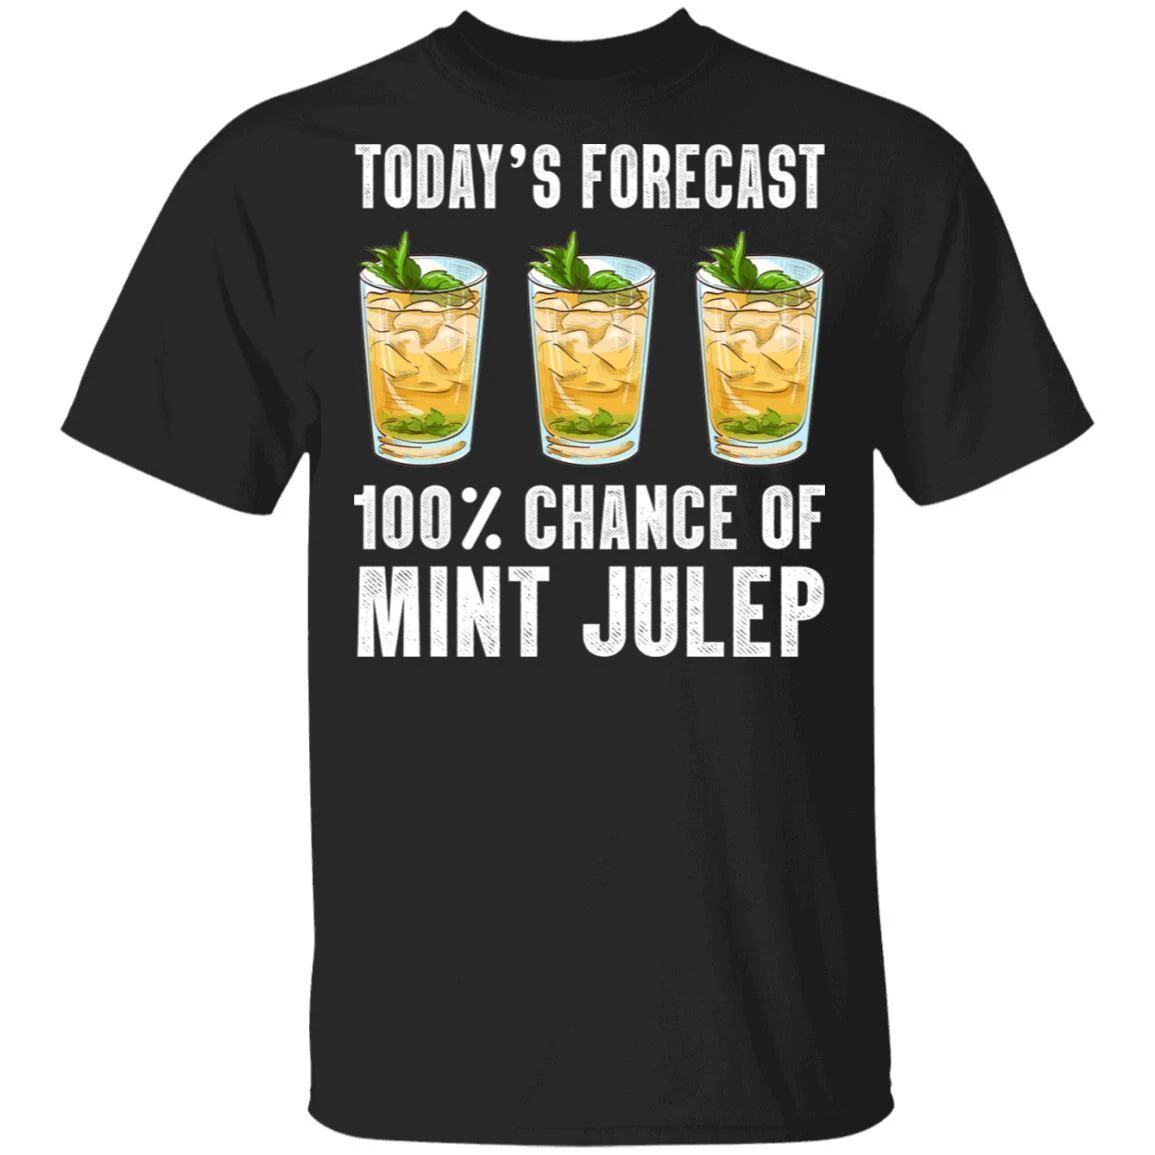 Today’s Forecast 100% Mint Julep T-shirt Cocktail Tee